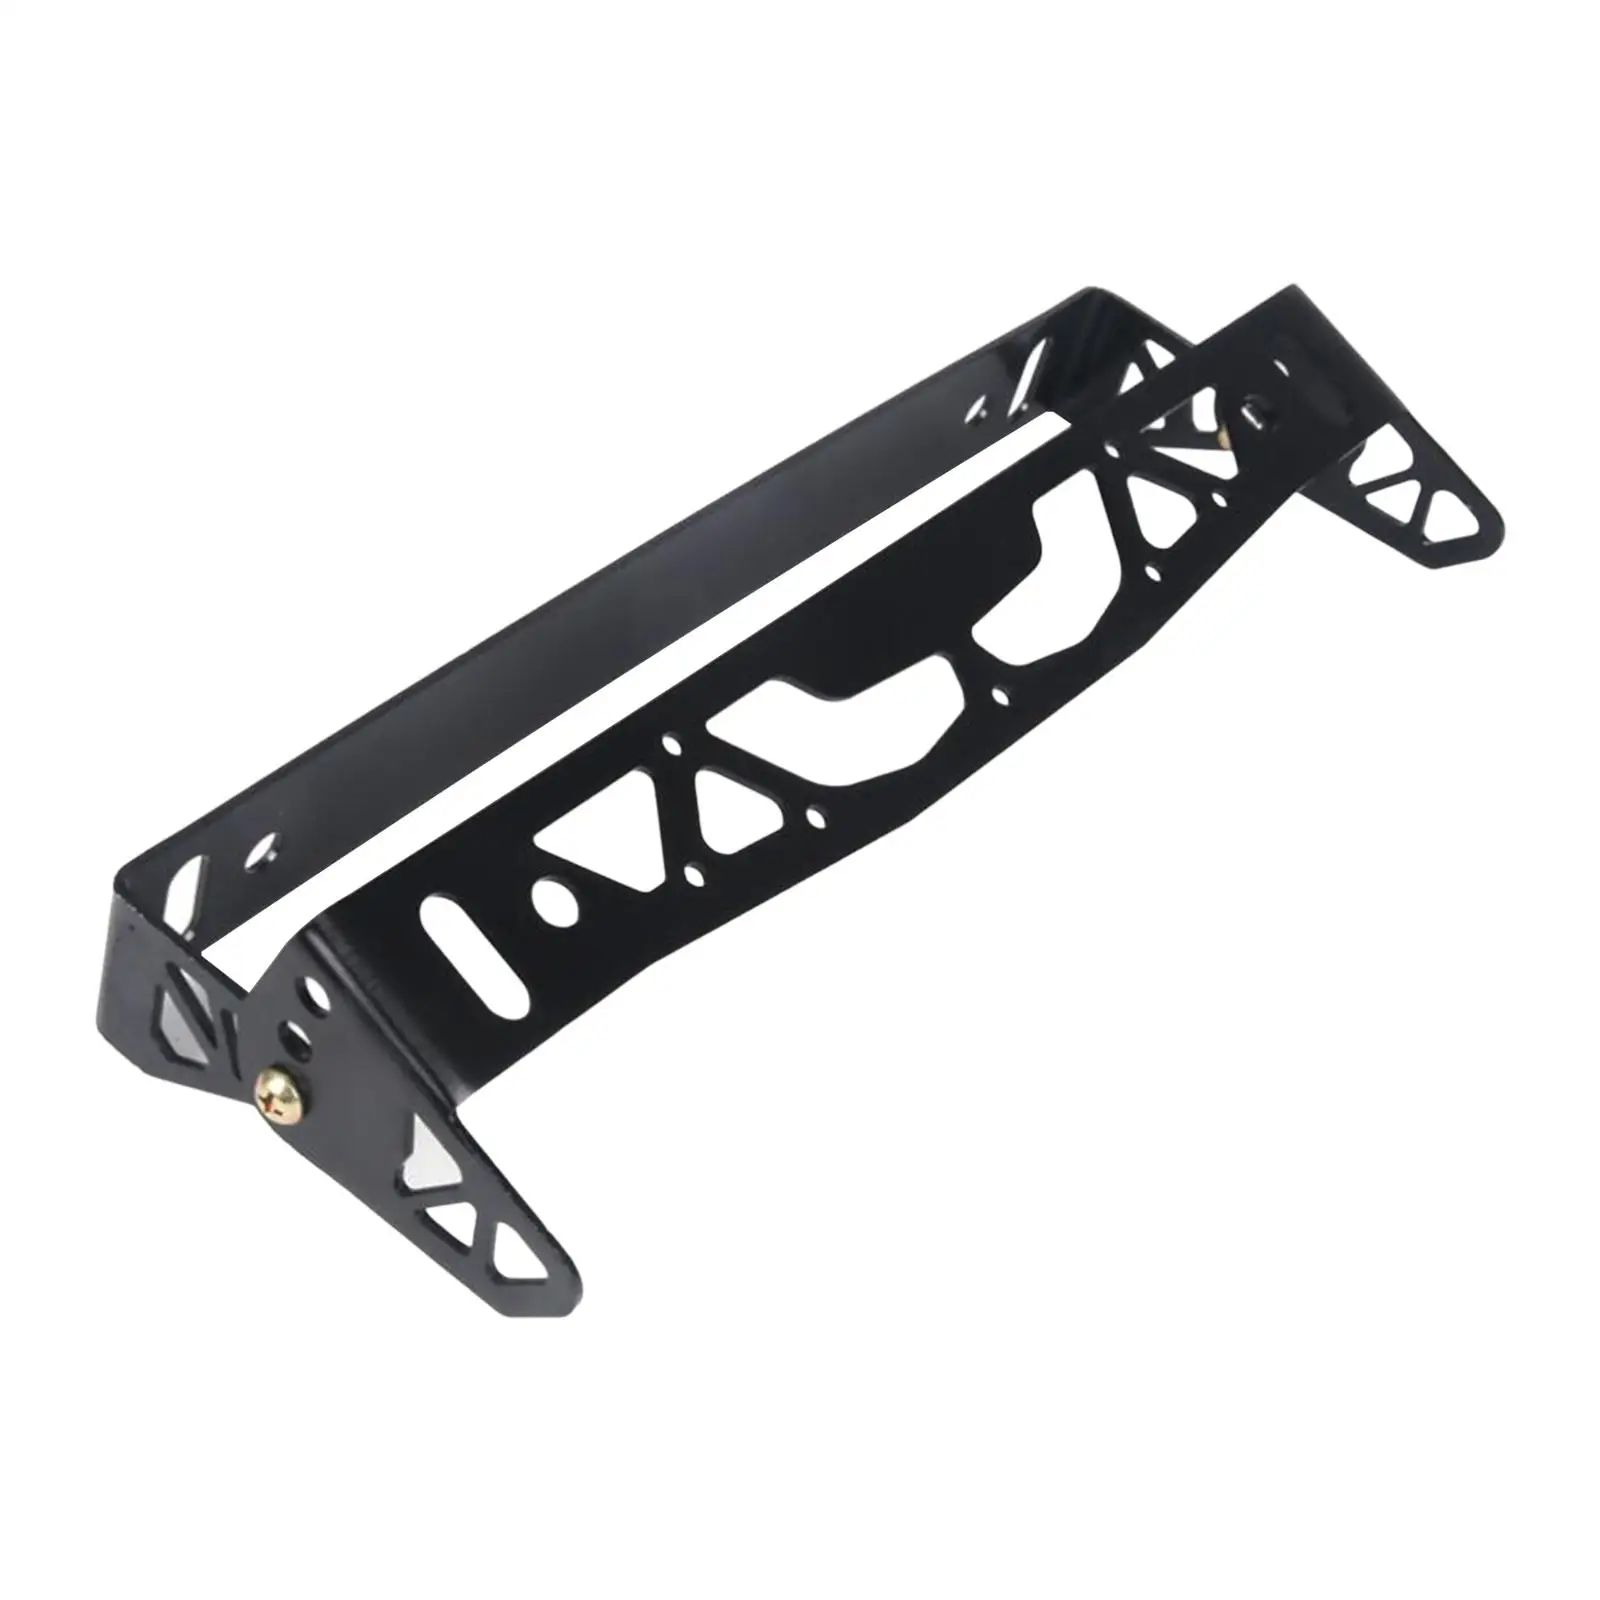 License Plate Frame Frame Easy to Install Modified Part Replacement Universal Auto Accessories Automotive License Tag Holder